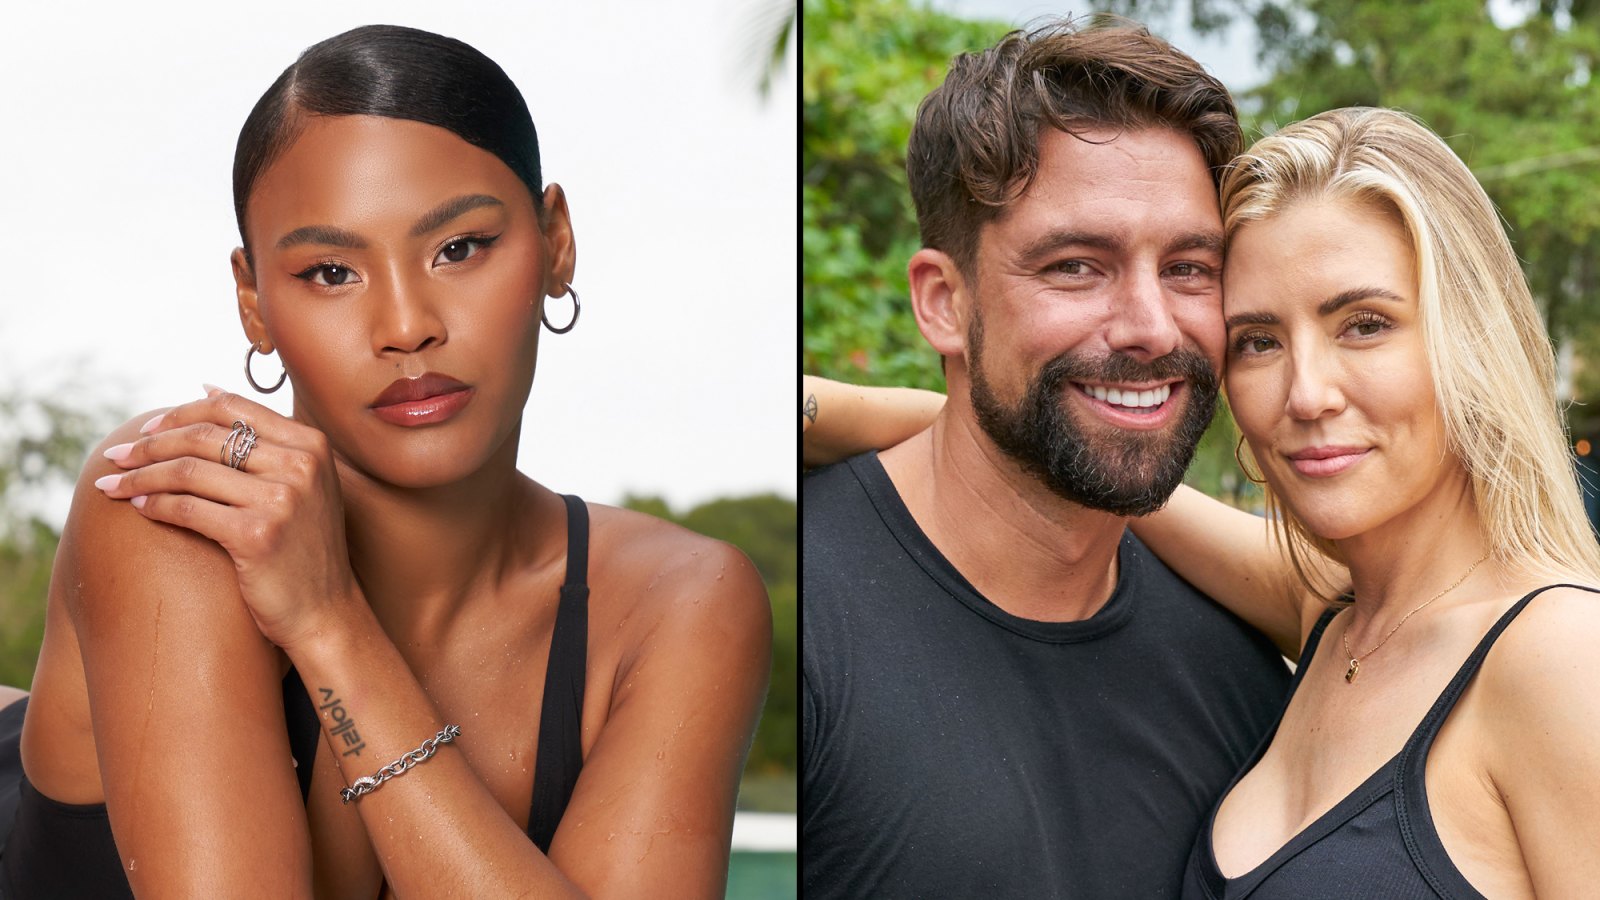 BiP's Sierra Jackson Slams Michael Allio and Danielle Maltby for Continuing to Speak About Her